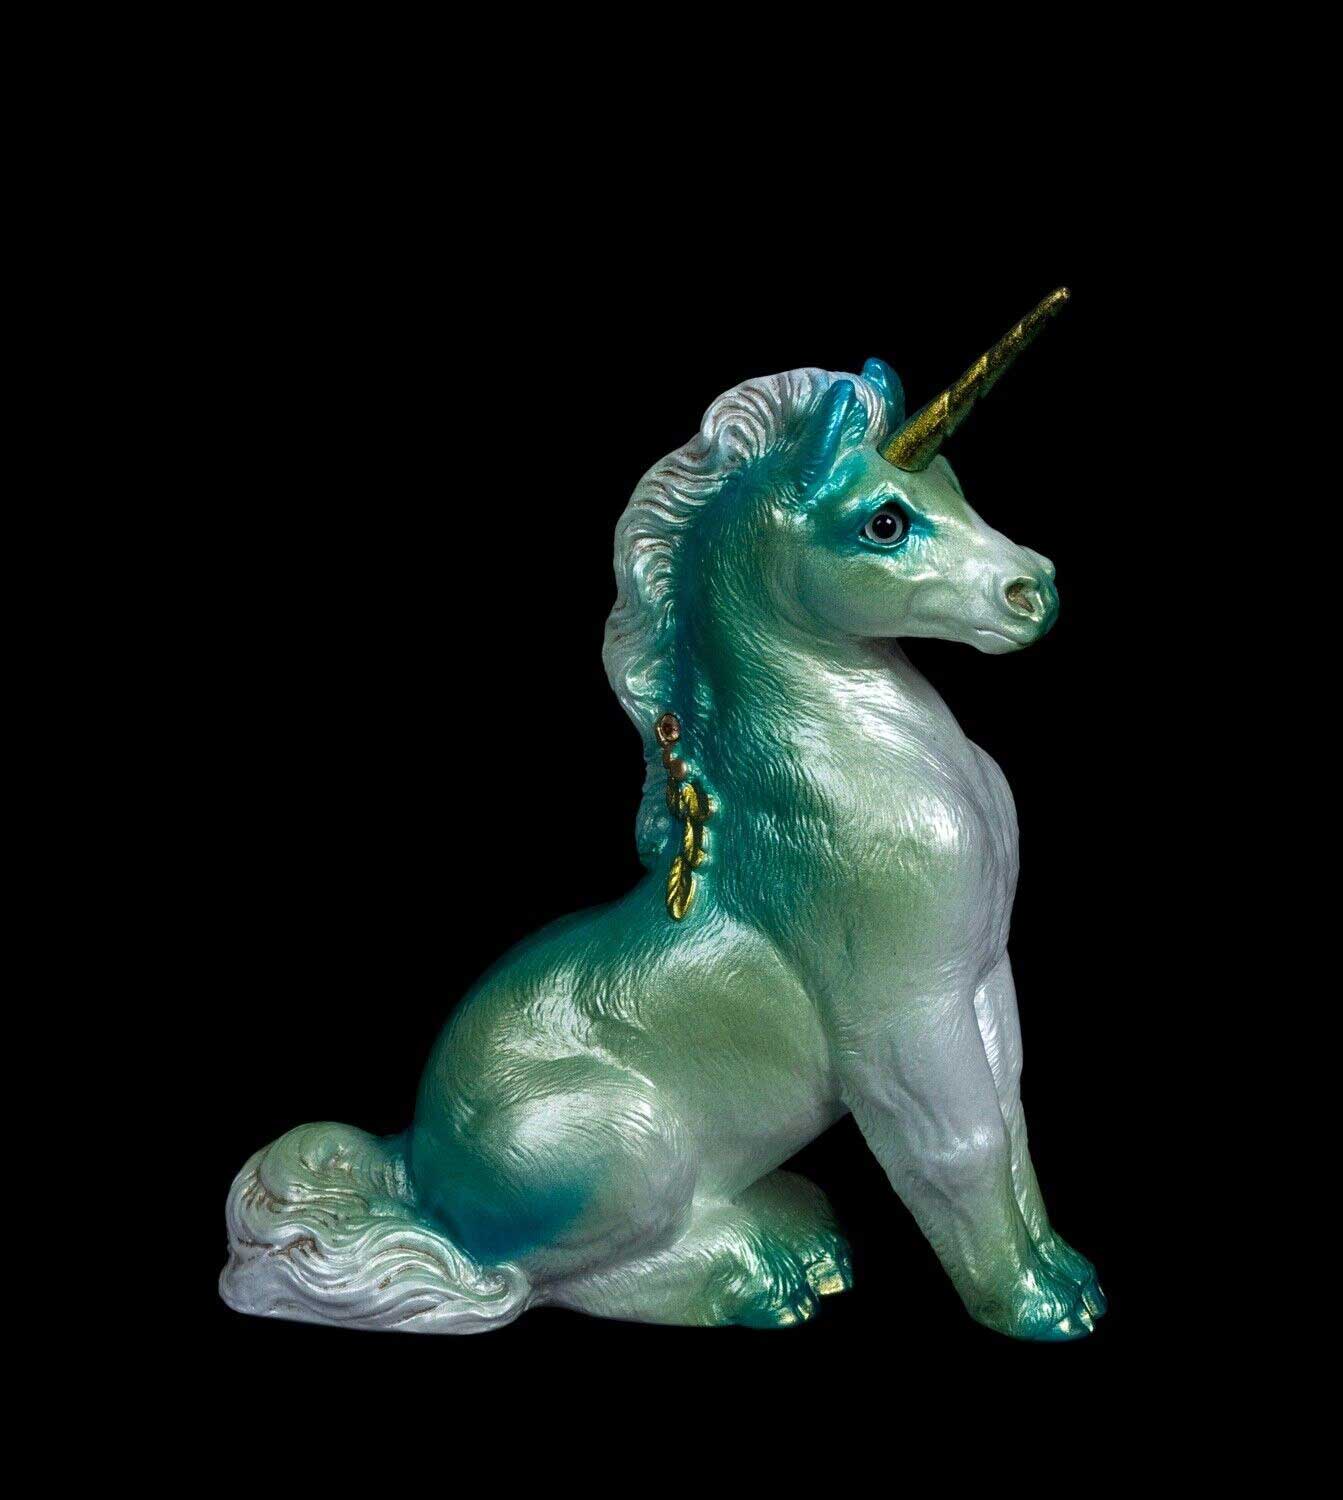 20230527-Seaglass-Ponycorn-Test-Paint-1-by-Gina